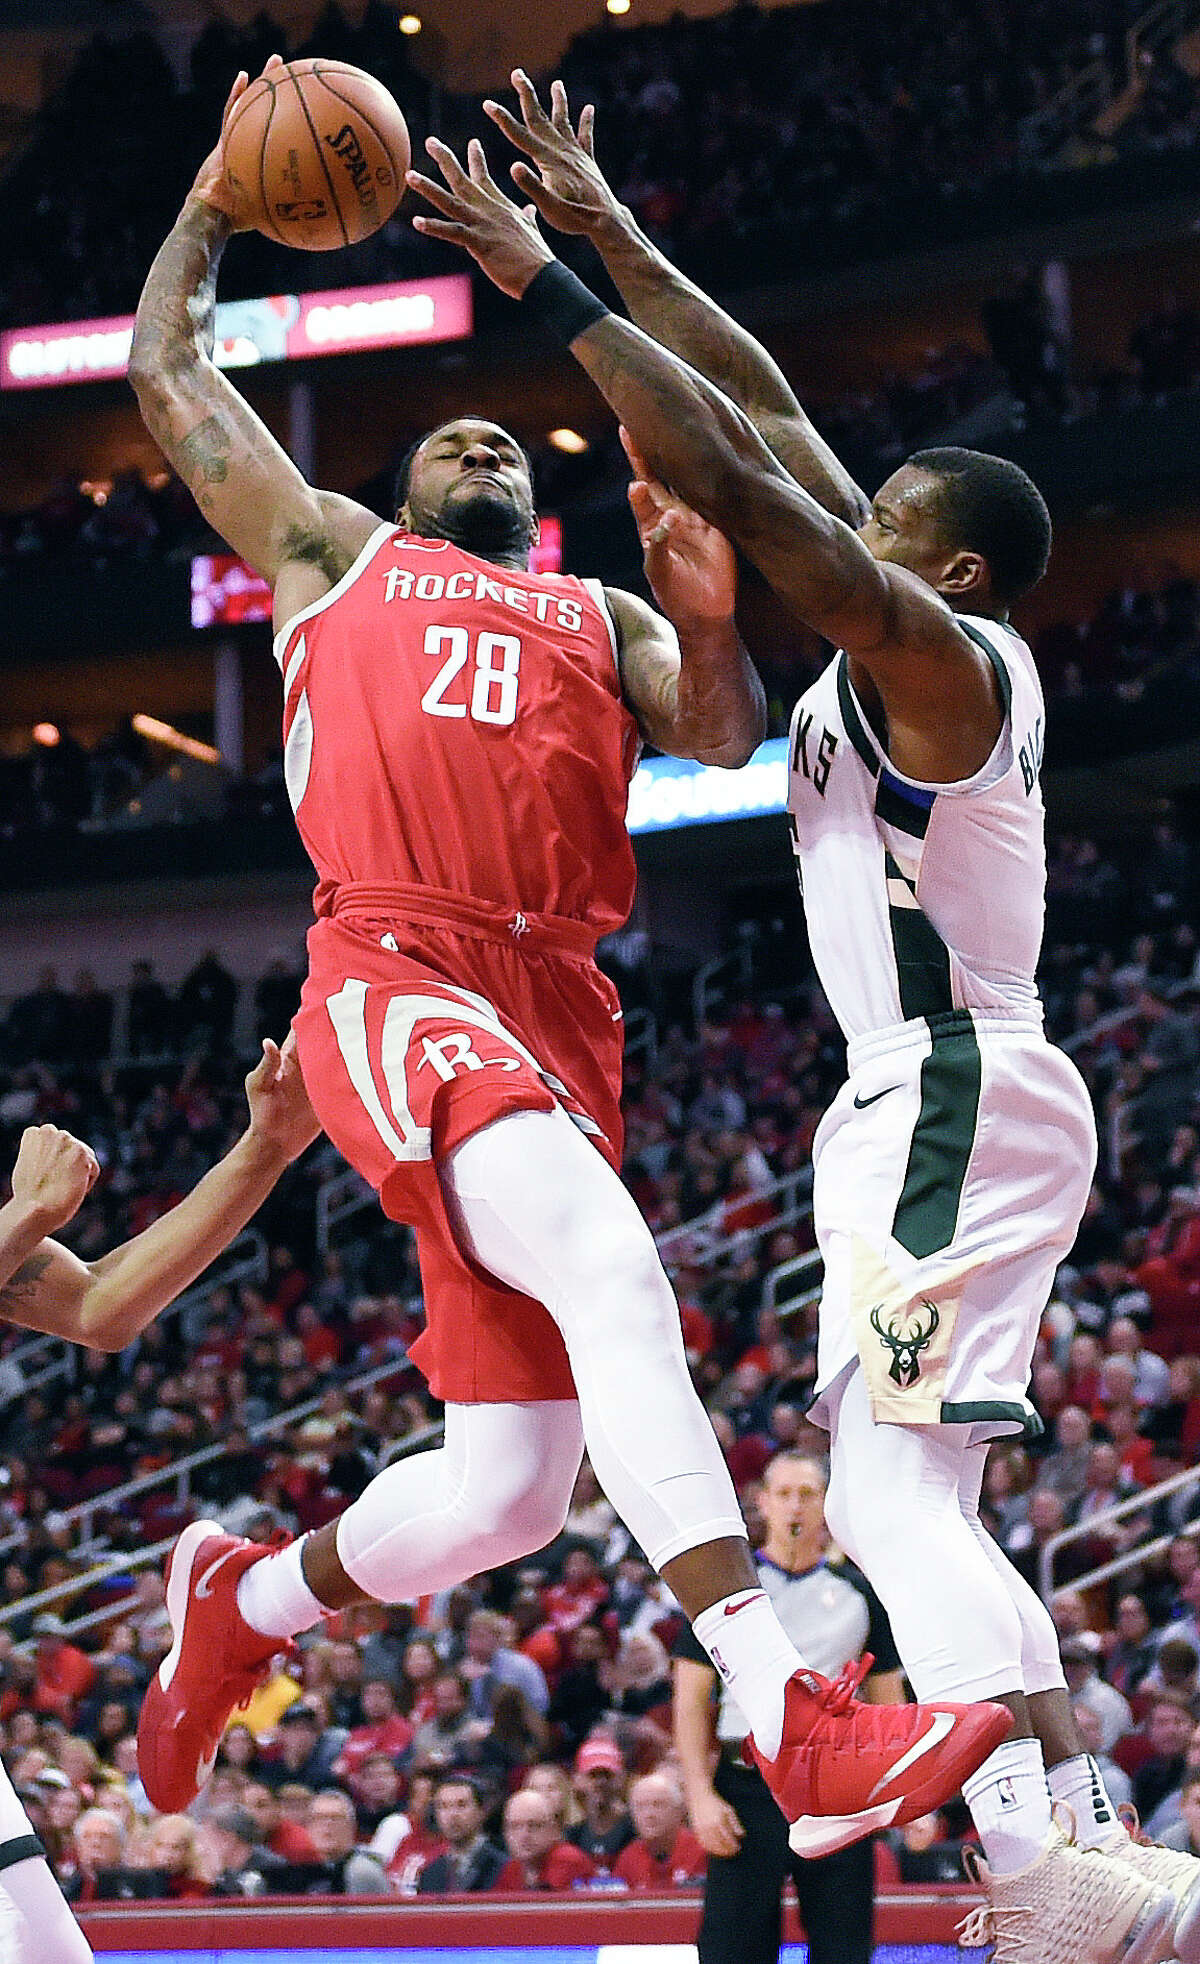 Houston Rockets forward Tarik Black (28) drives to the basket as Milwaukee Bucks guard Eric Bledsoe defends during the second half of an NBA basketball game, Saturday, Dec. 16, 2017, in Houston. Houston won the game 115-111. (AP Photo/Eric Christian Smith)